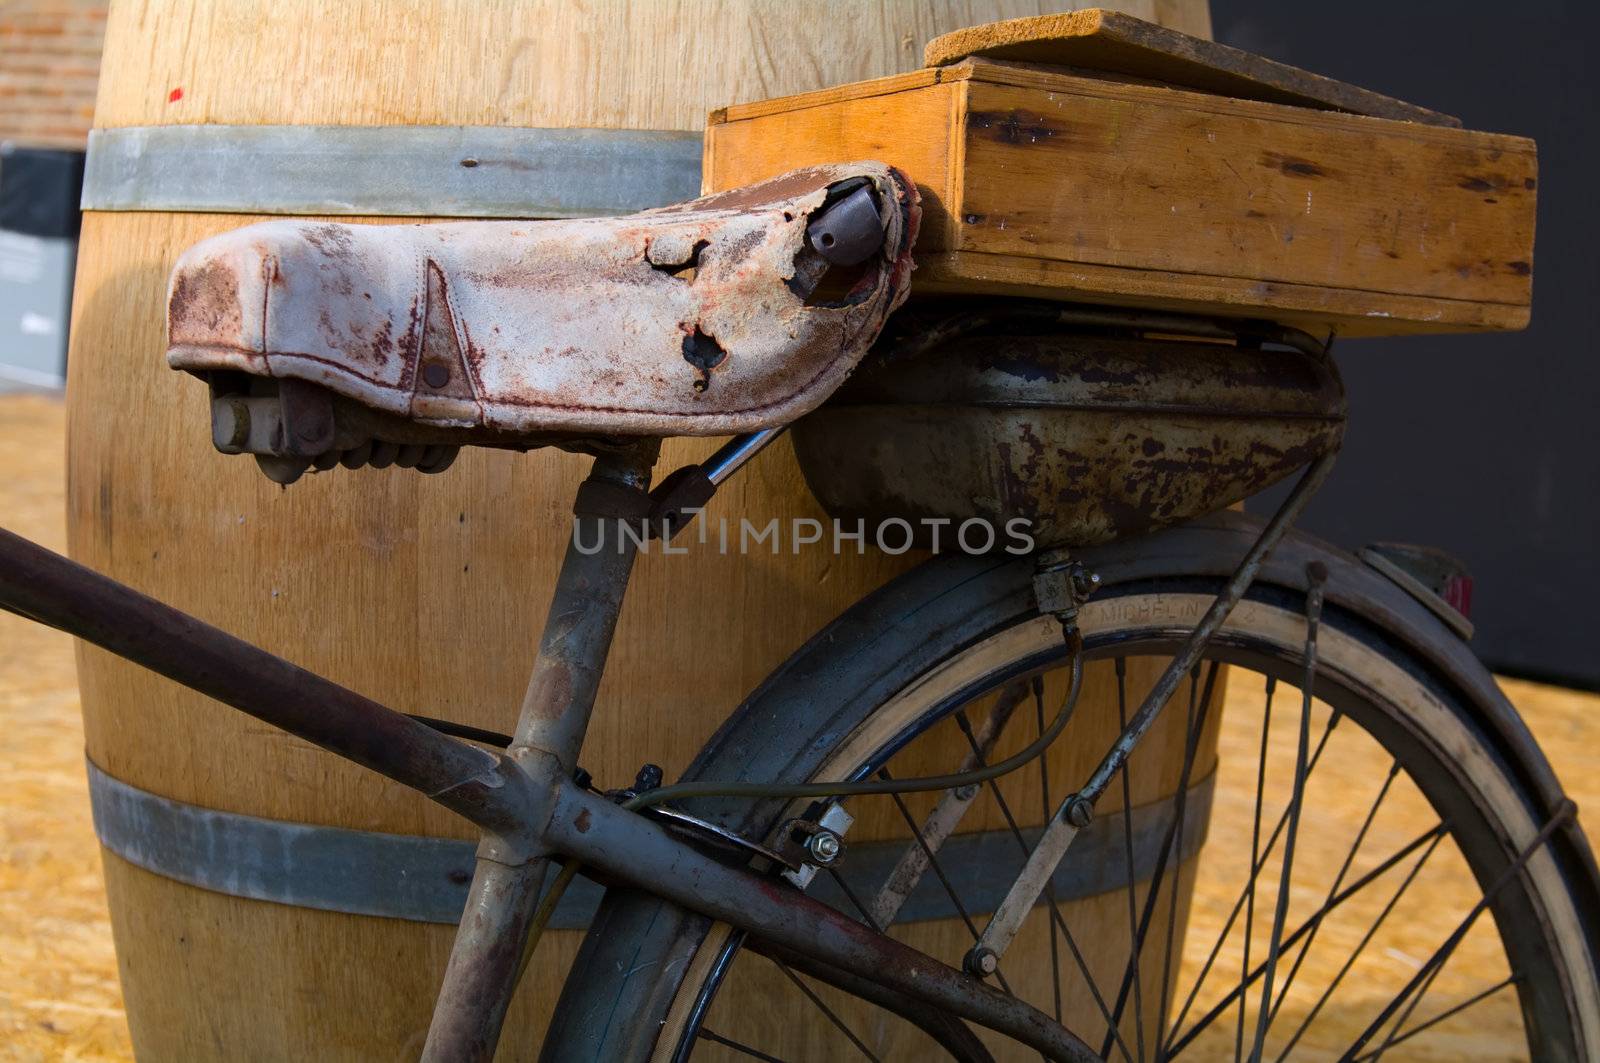 Old moped with a wooden box back